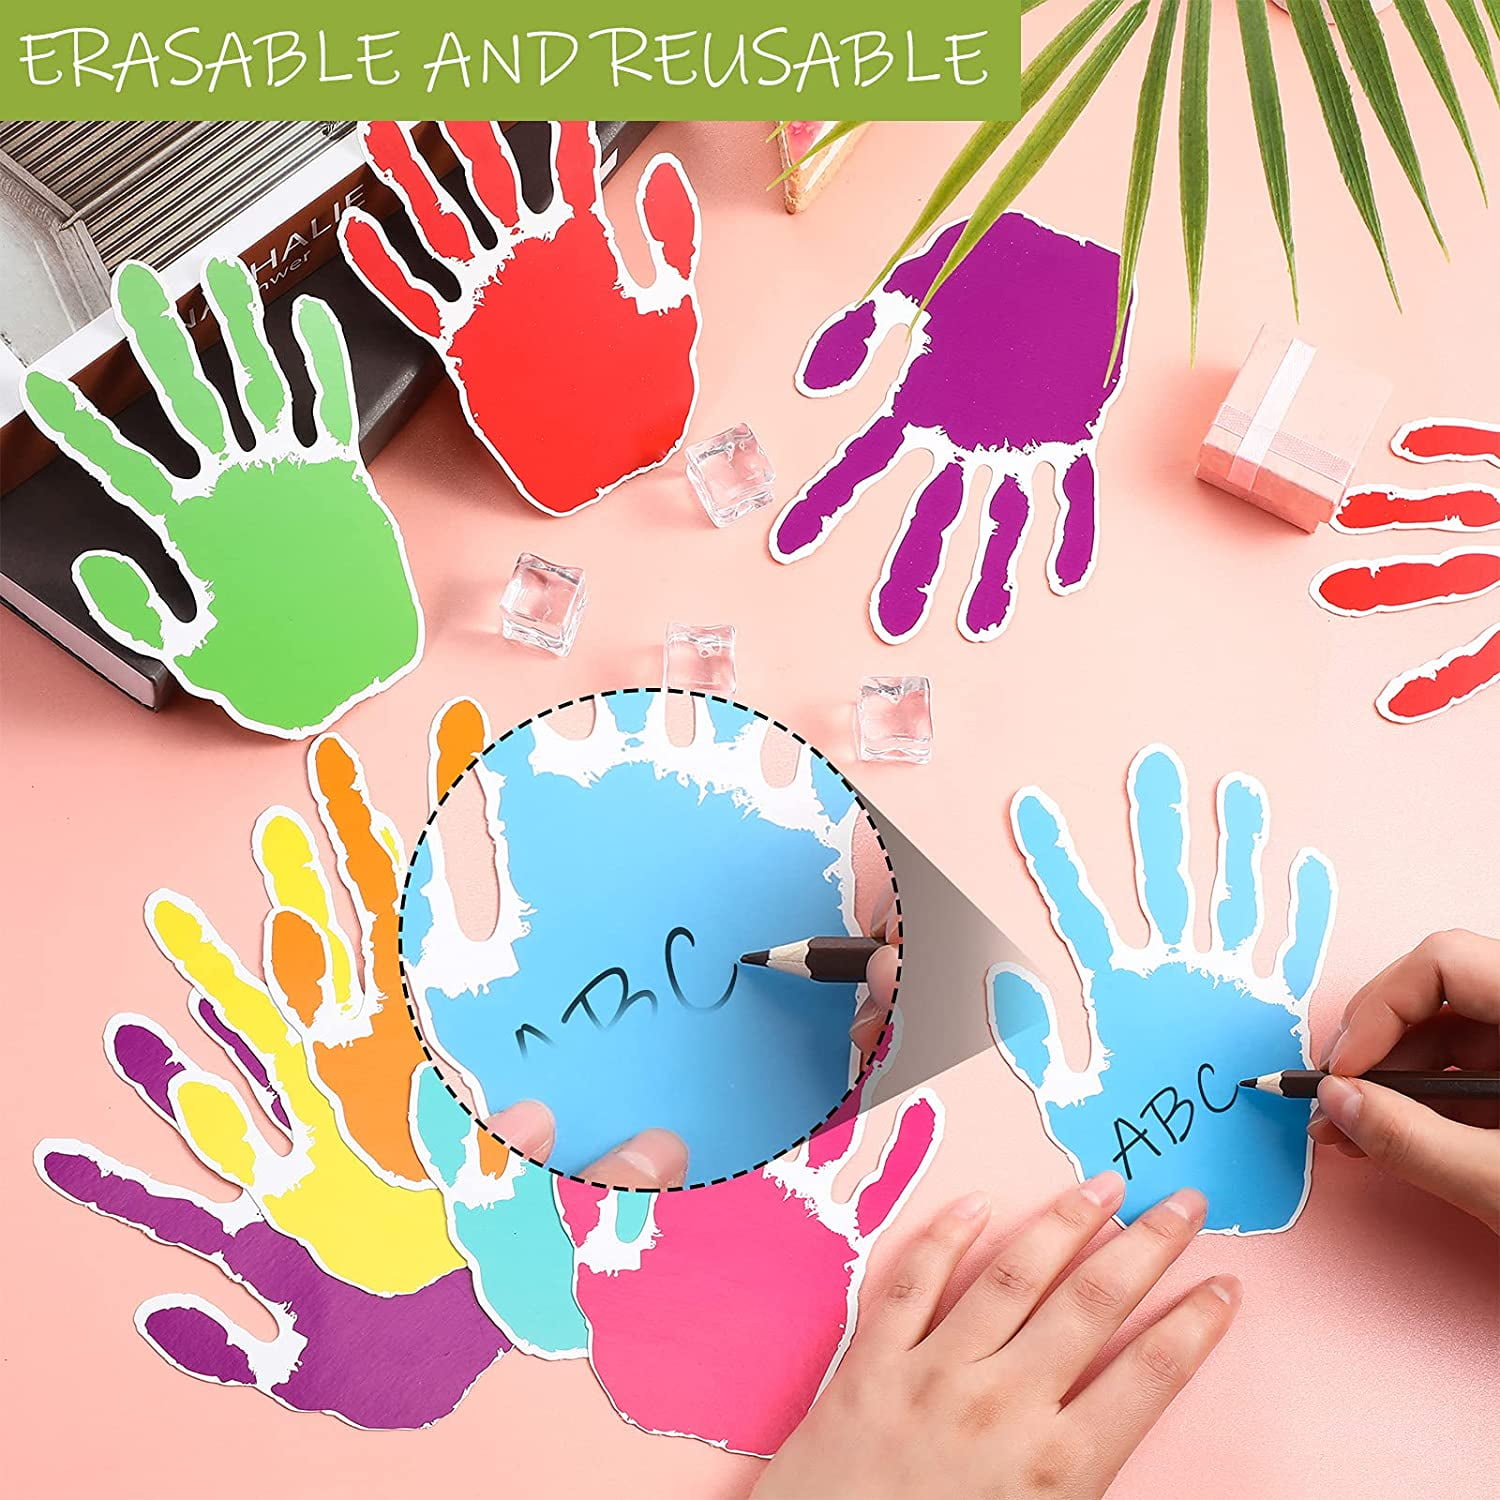 48 Pieces Colorful Handprint Cut-Outs Hand Creative Cutouts Handprint Accents Paper Cutouts Name Tags Bulletin Board Classroom Decoration for Teacher Student Back to School Party 5.5 x 3.9 Inch